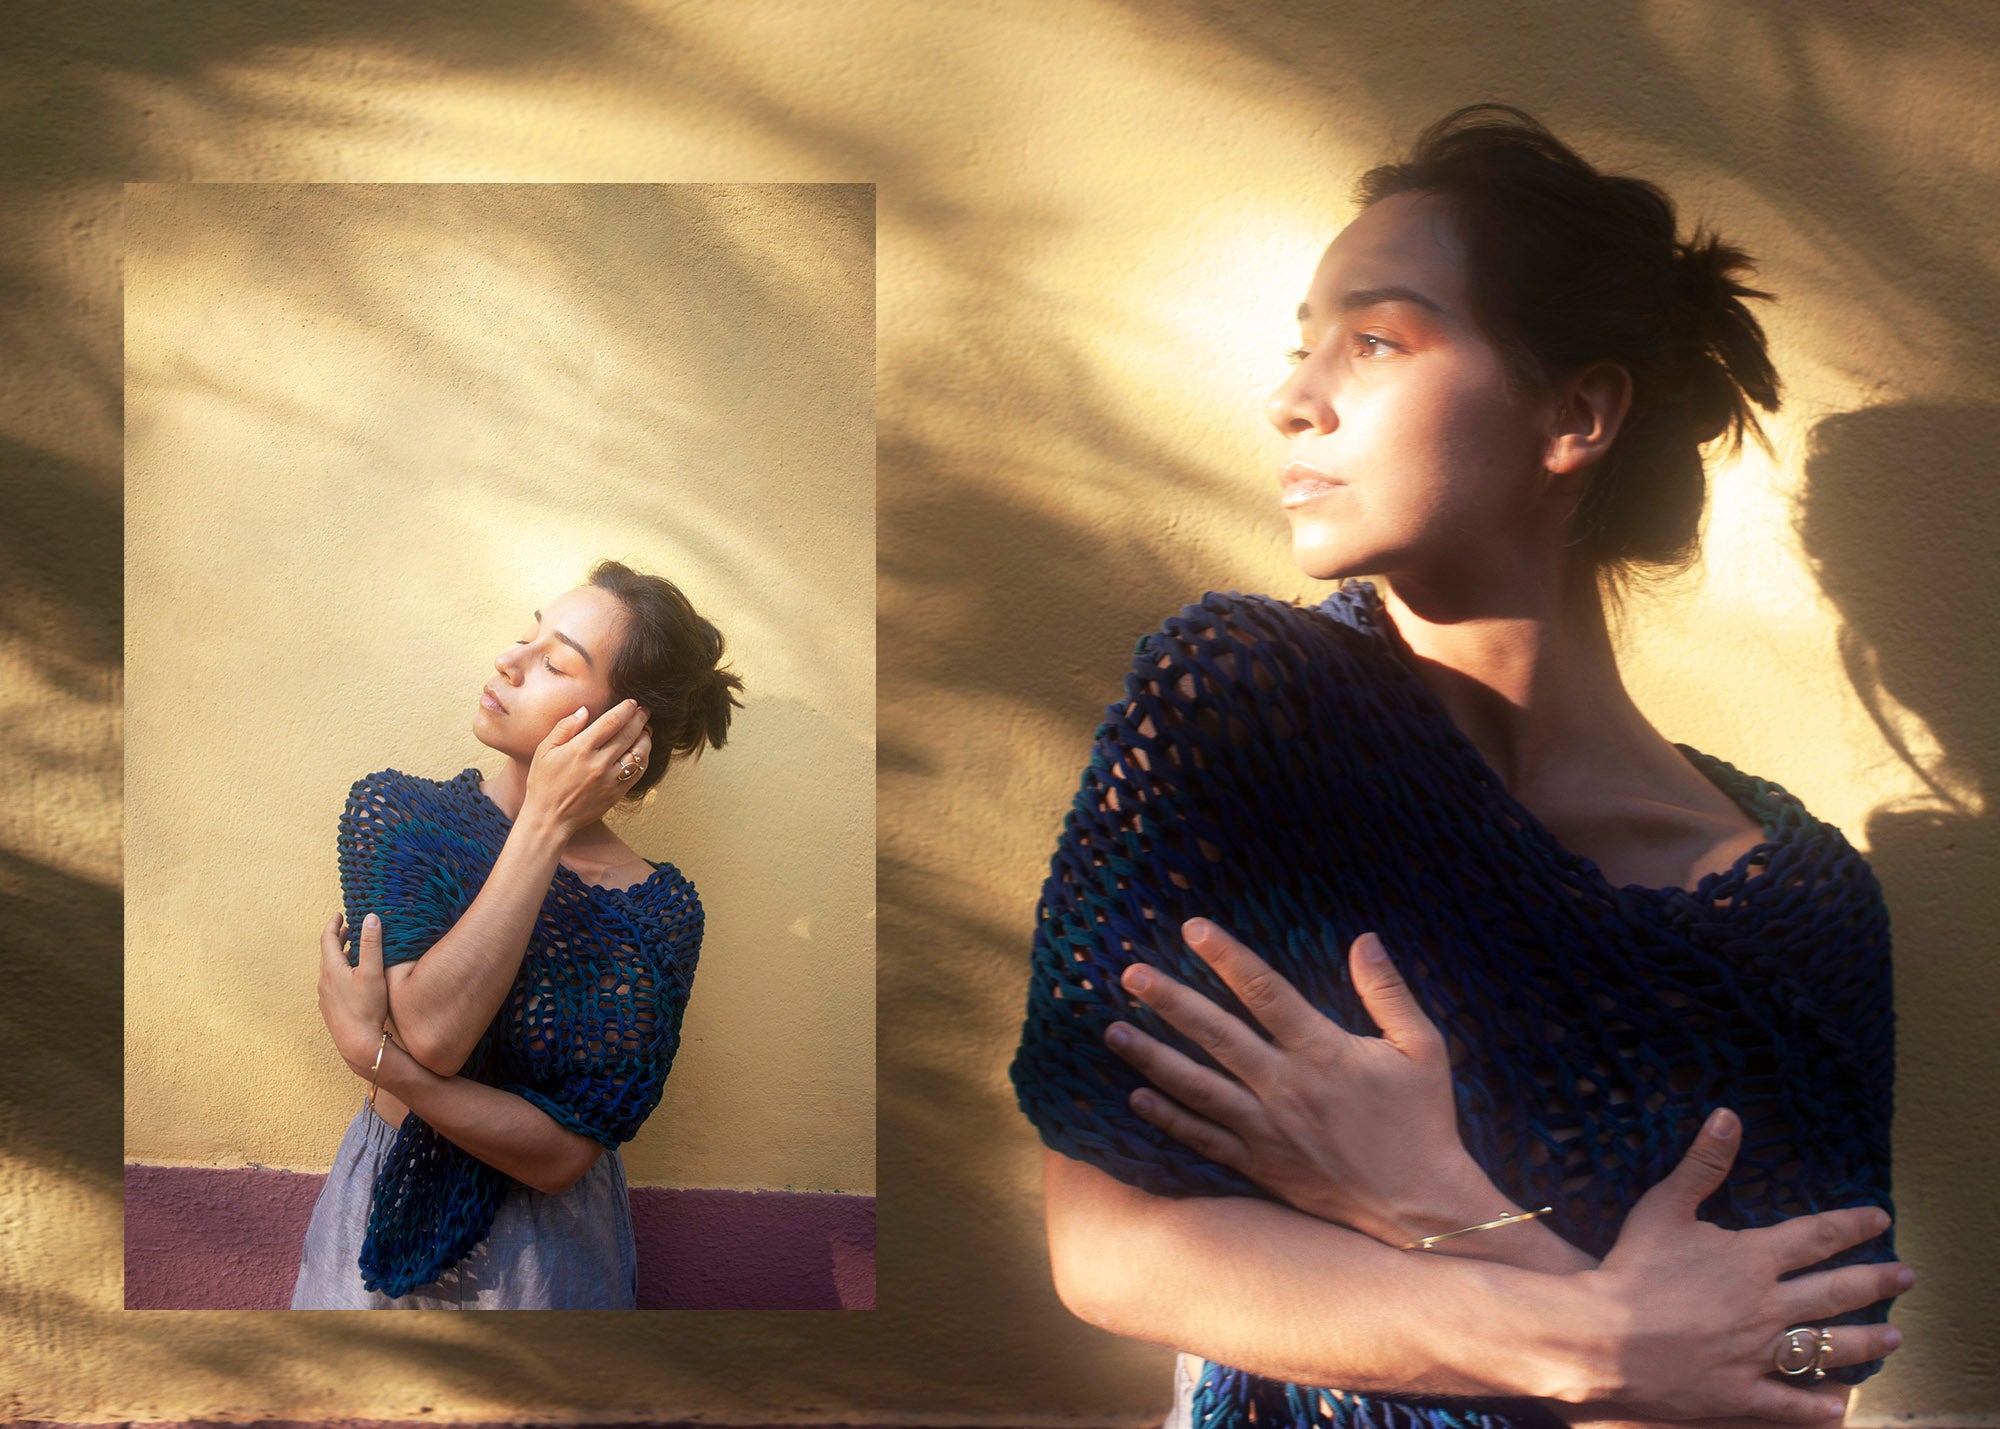 A woman in a diptych image wearing a handknit teal poncho in front of a yellow wall in the sunlight